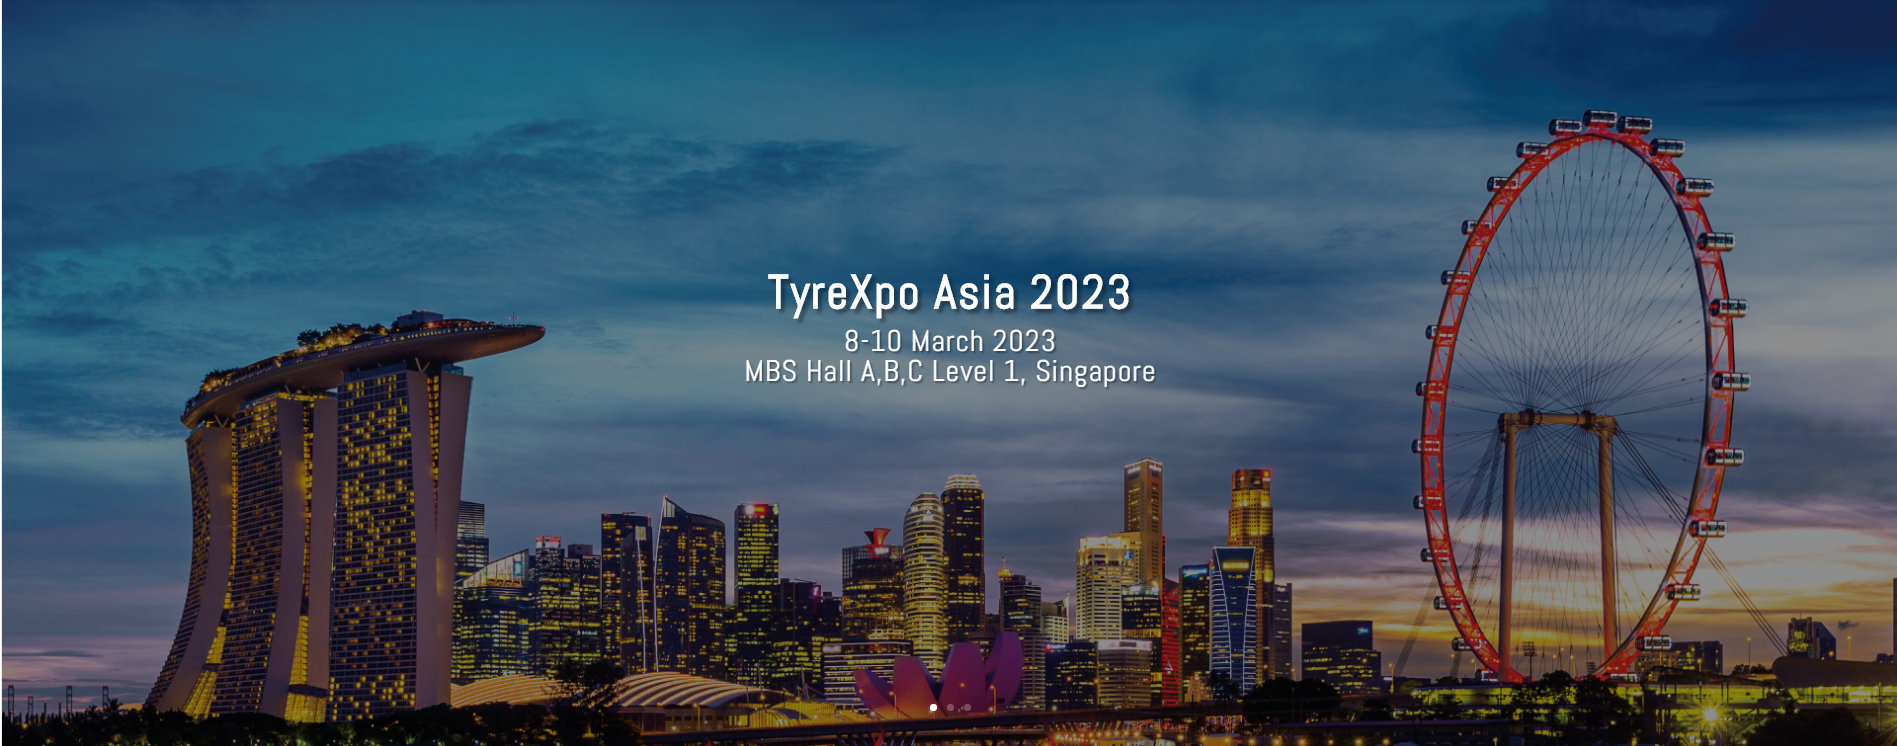 2023 Tyrexpo Asia 新加坡展.png